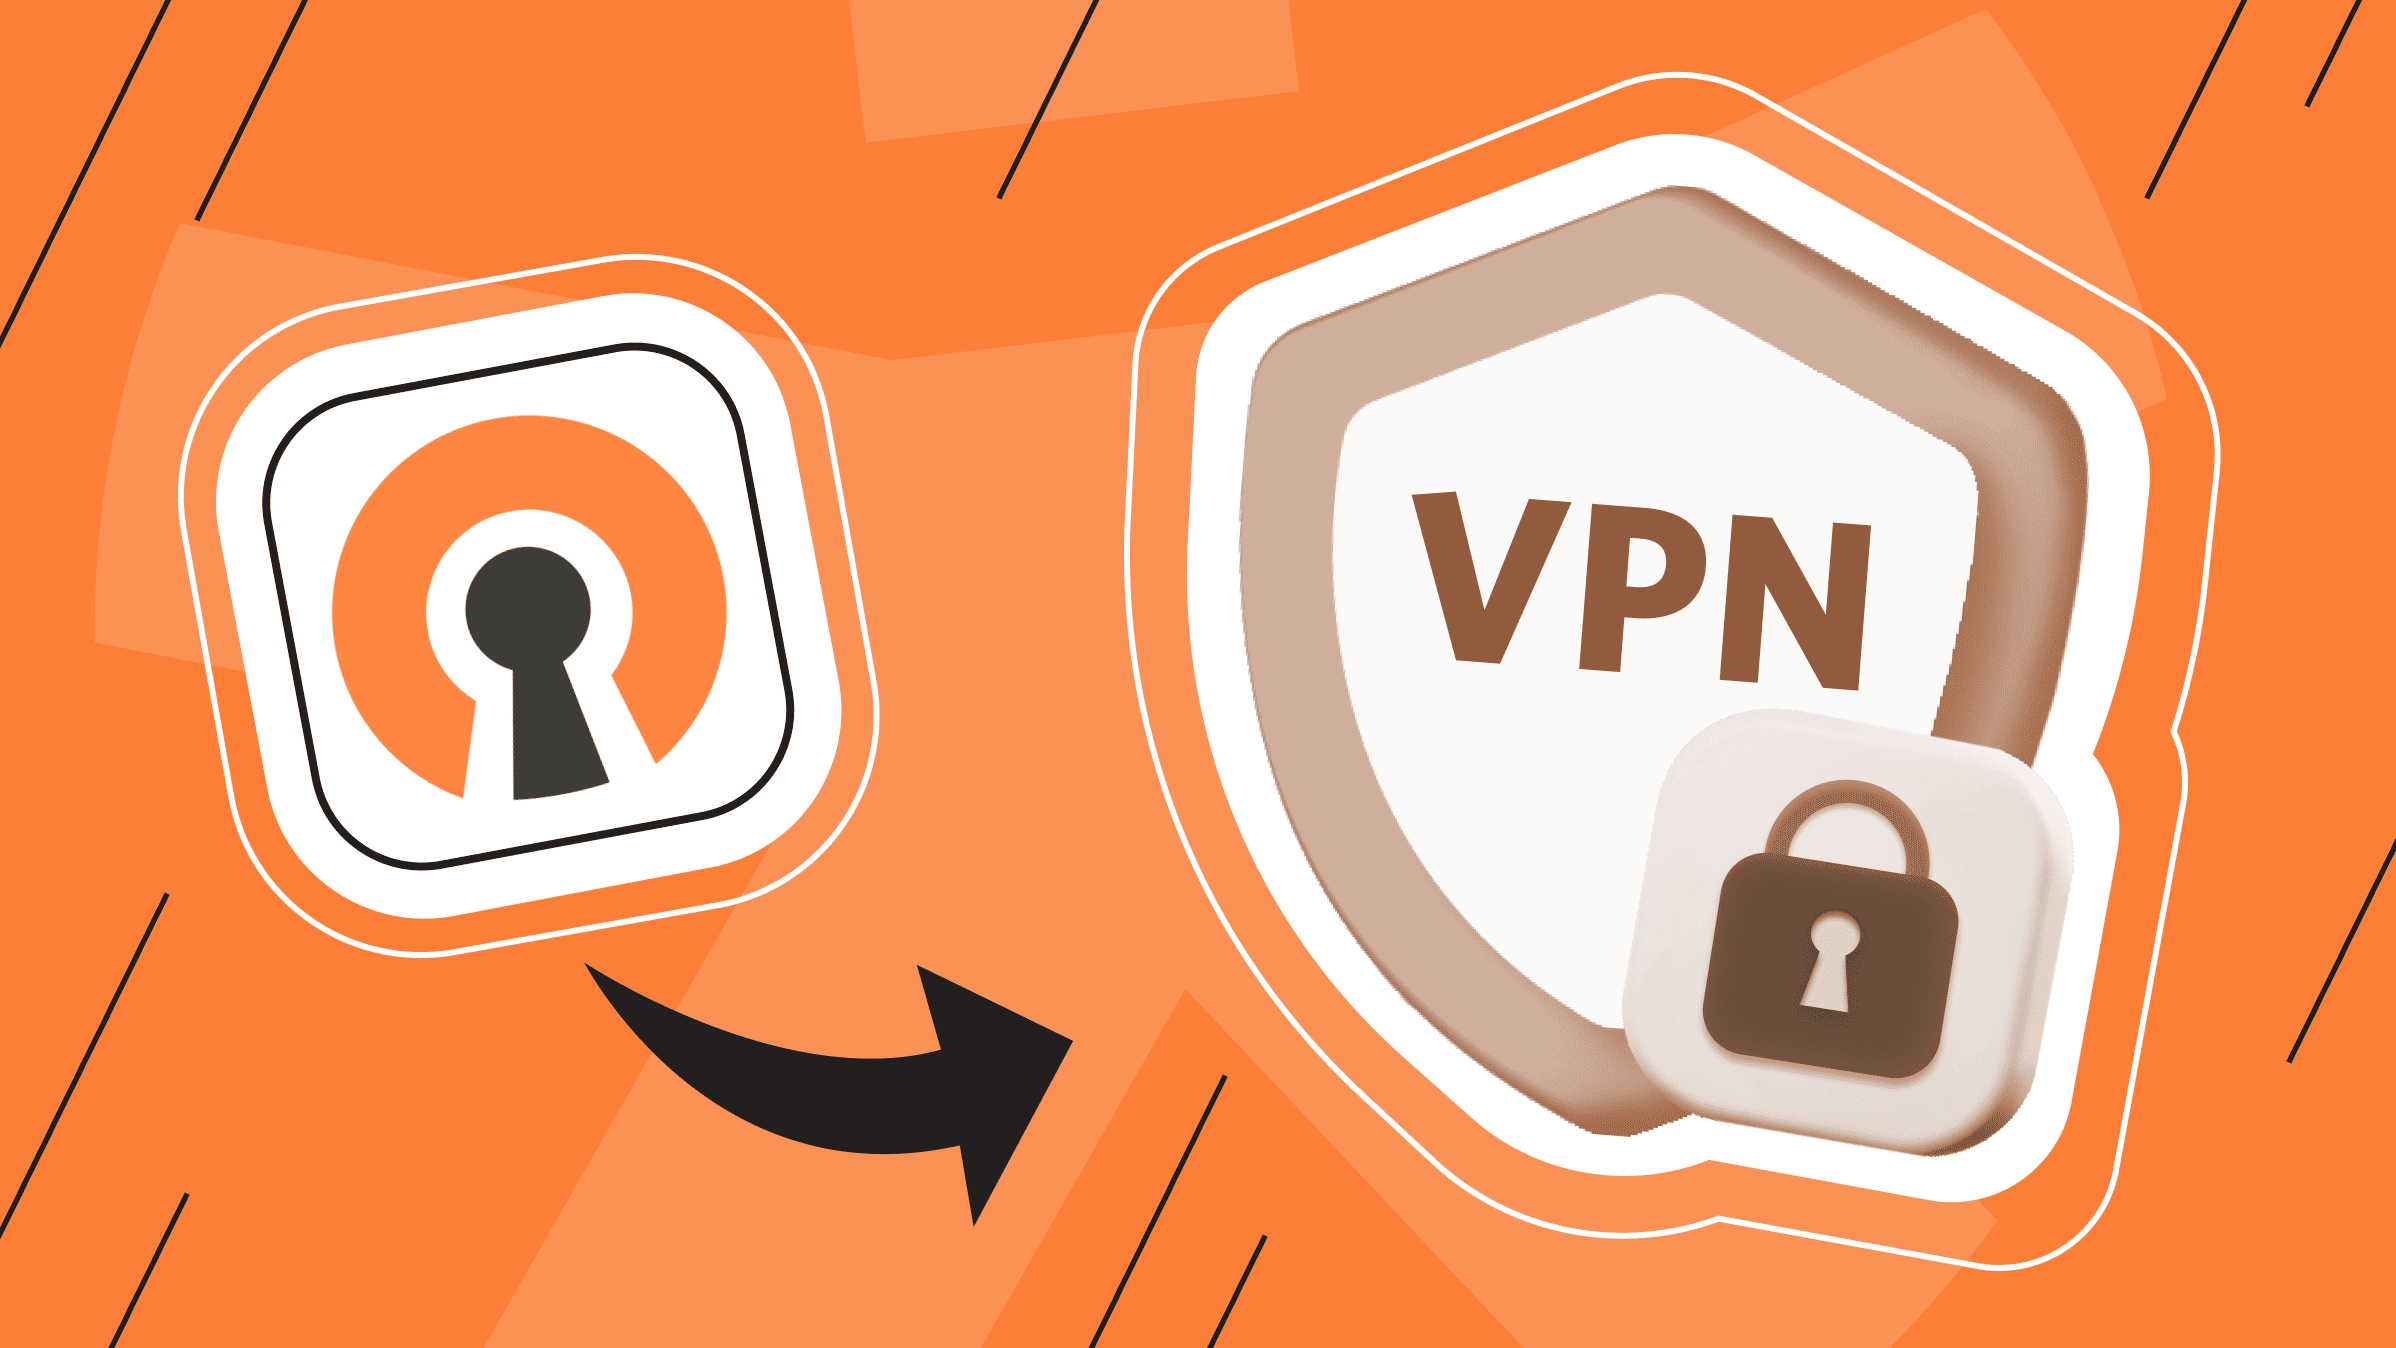 Setting up OpenVPN on devices with different OS: Android, Windows, Linux, iOS, MacOS